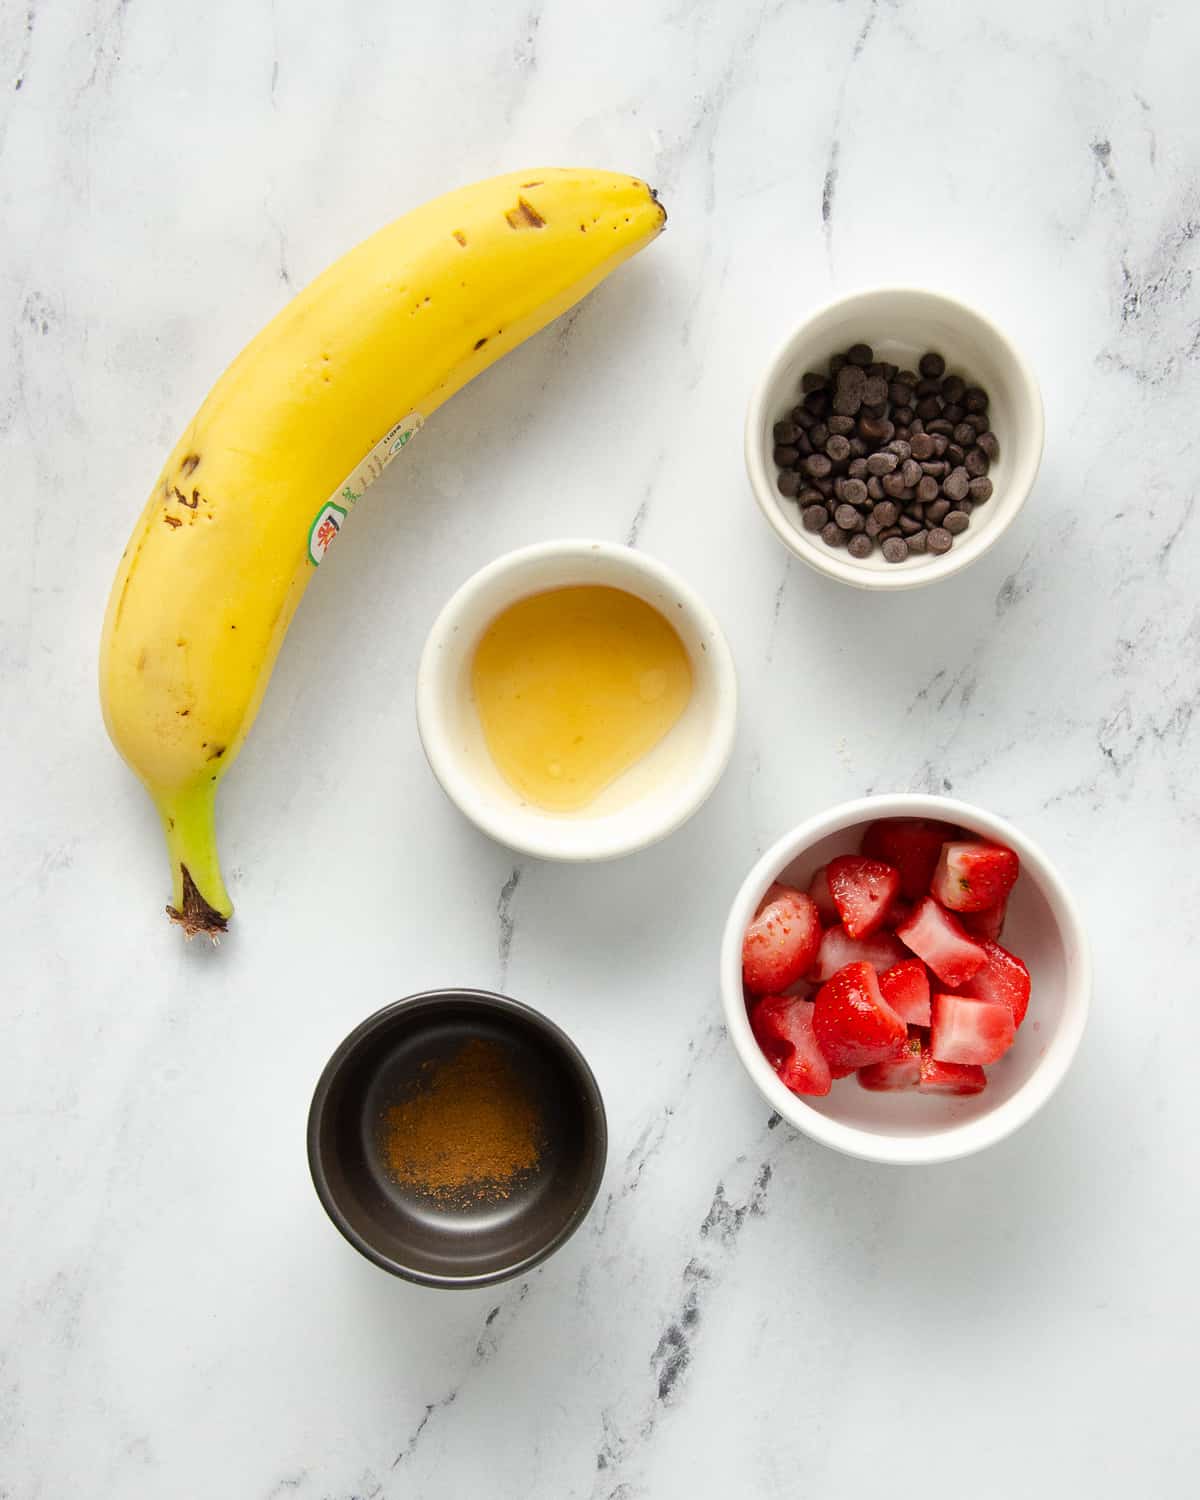 Add in options for overnight protein oats: banana, honey, cinnamon, strawberries, chocolate chips.